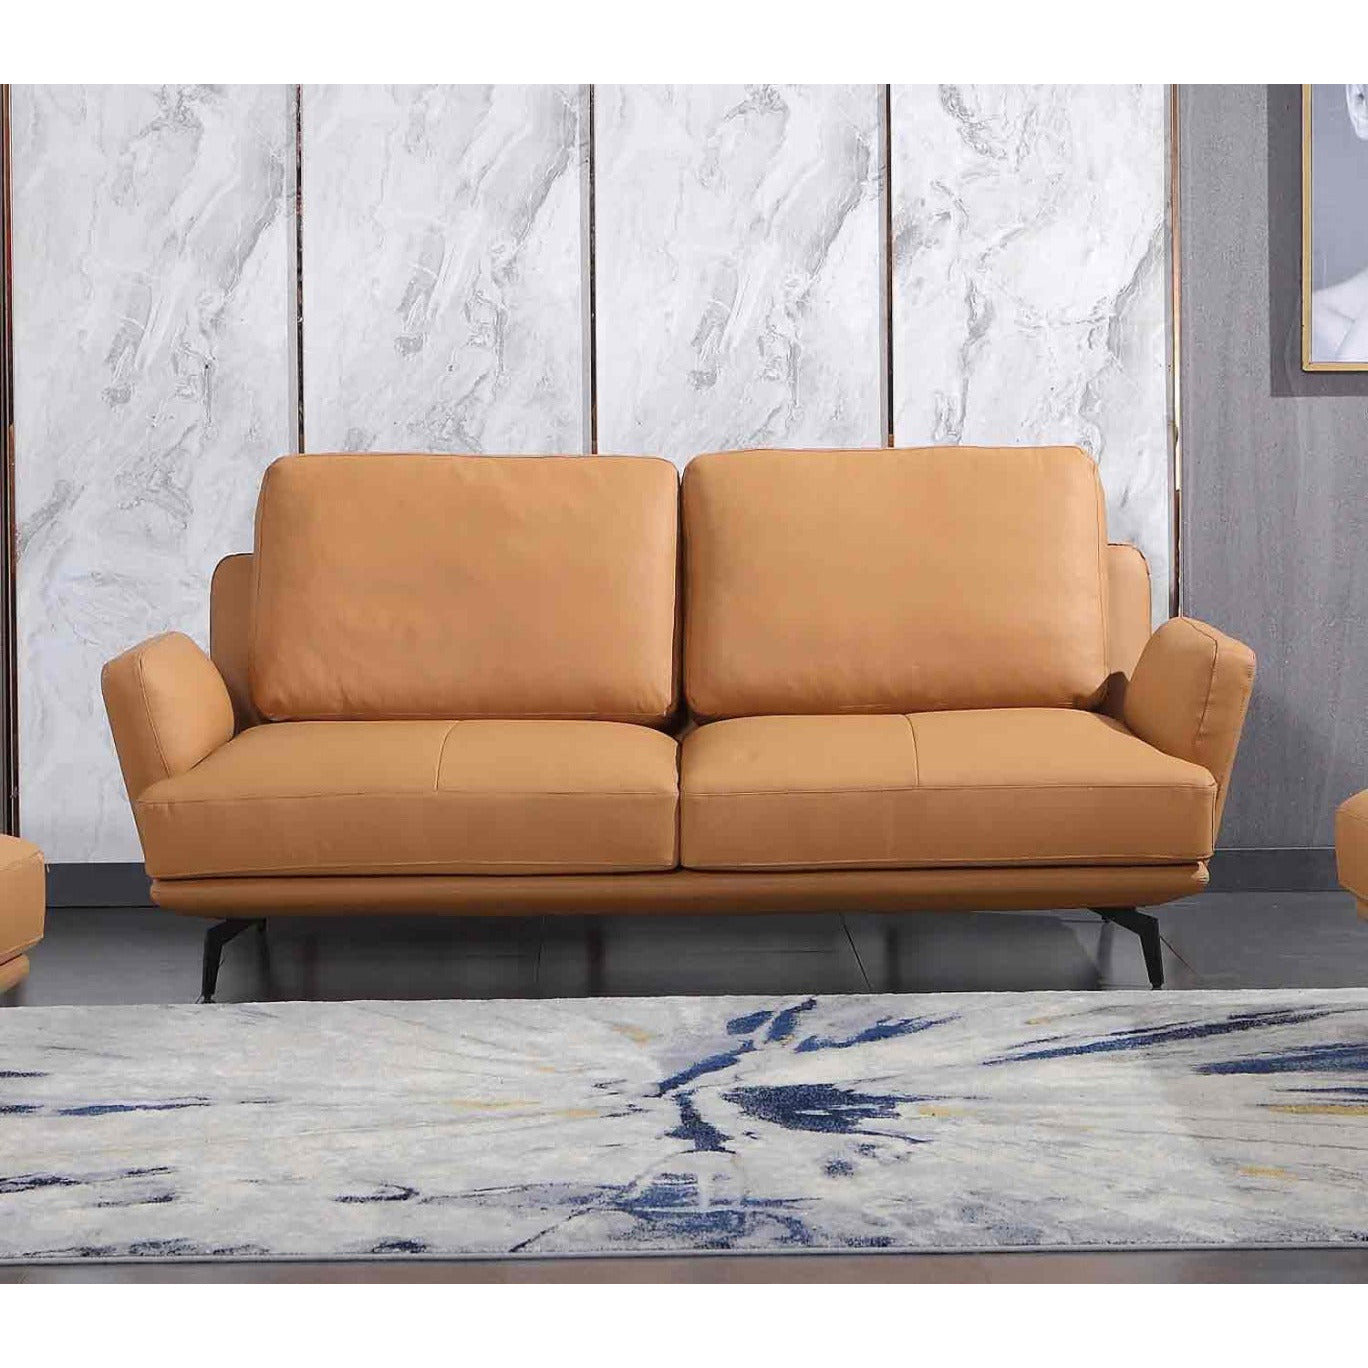 European Furniture - Tratto 3 Piece Living Room Set in Cognac - 37457-3SET - New Star Living